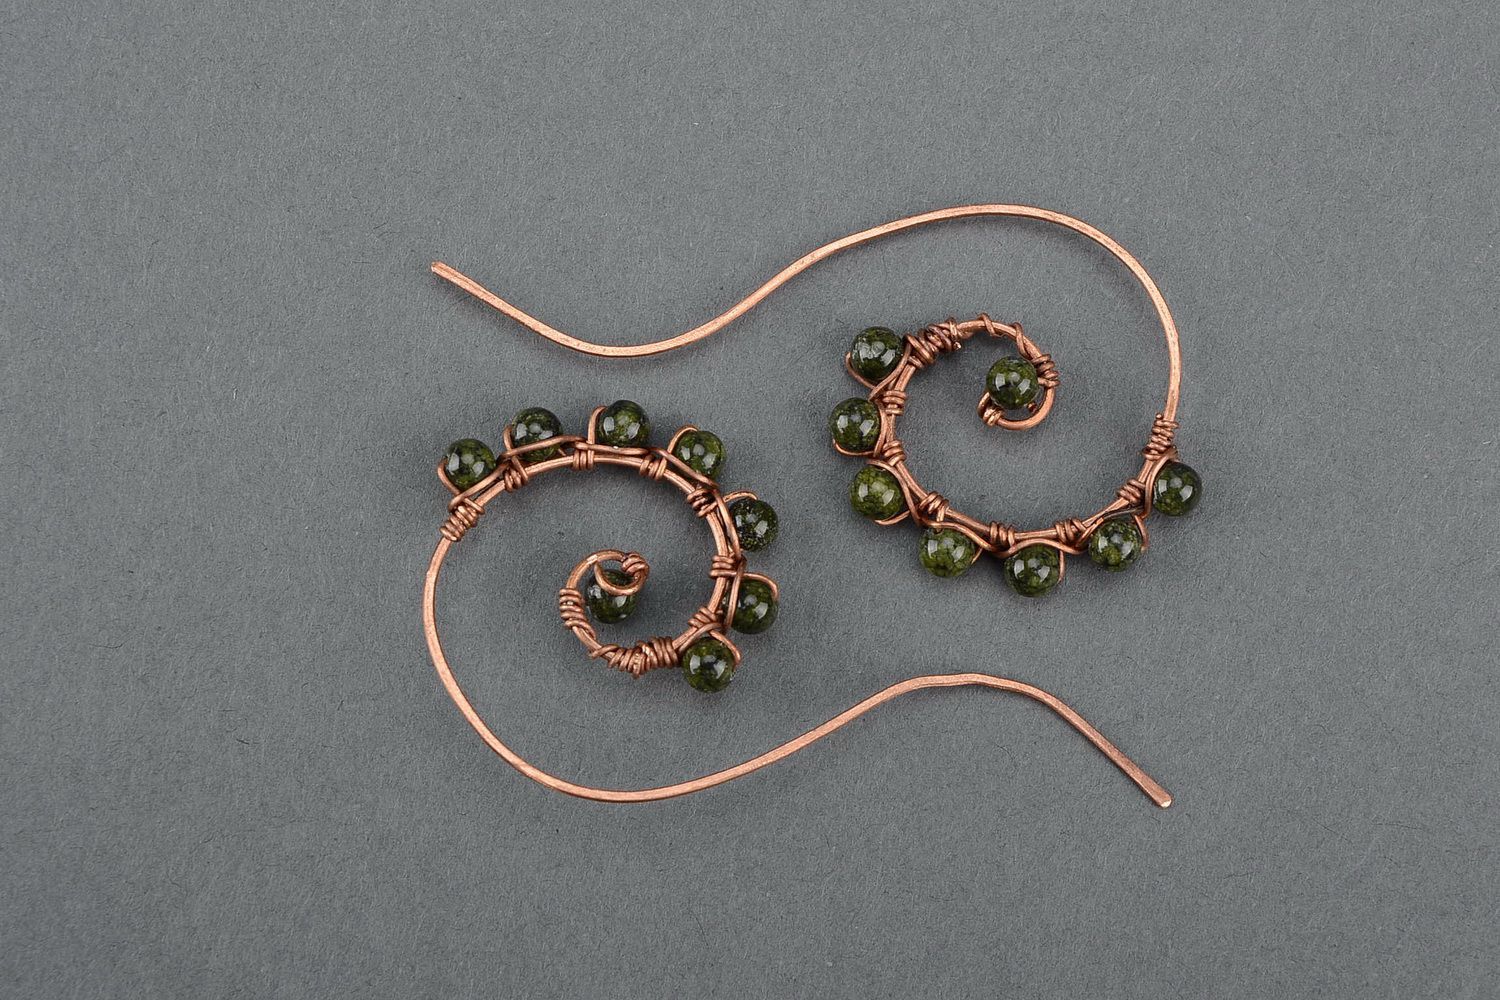 Eaarrings made of copper wire, stone - serpentine photo 4